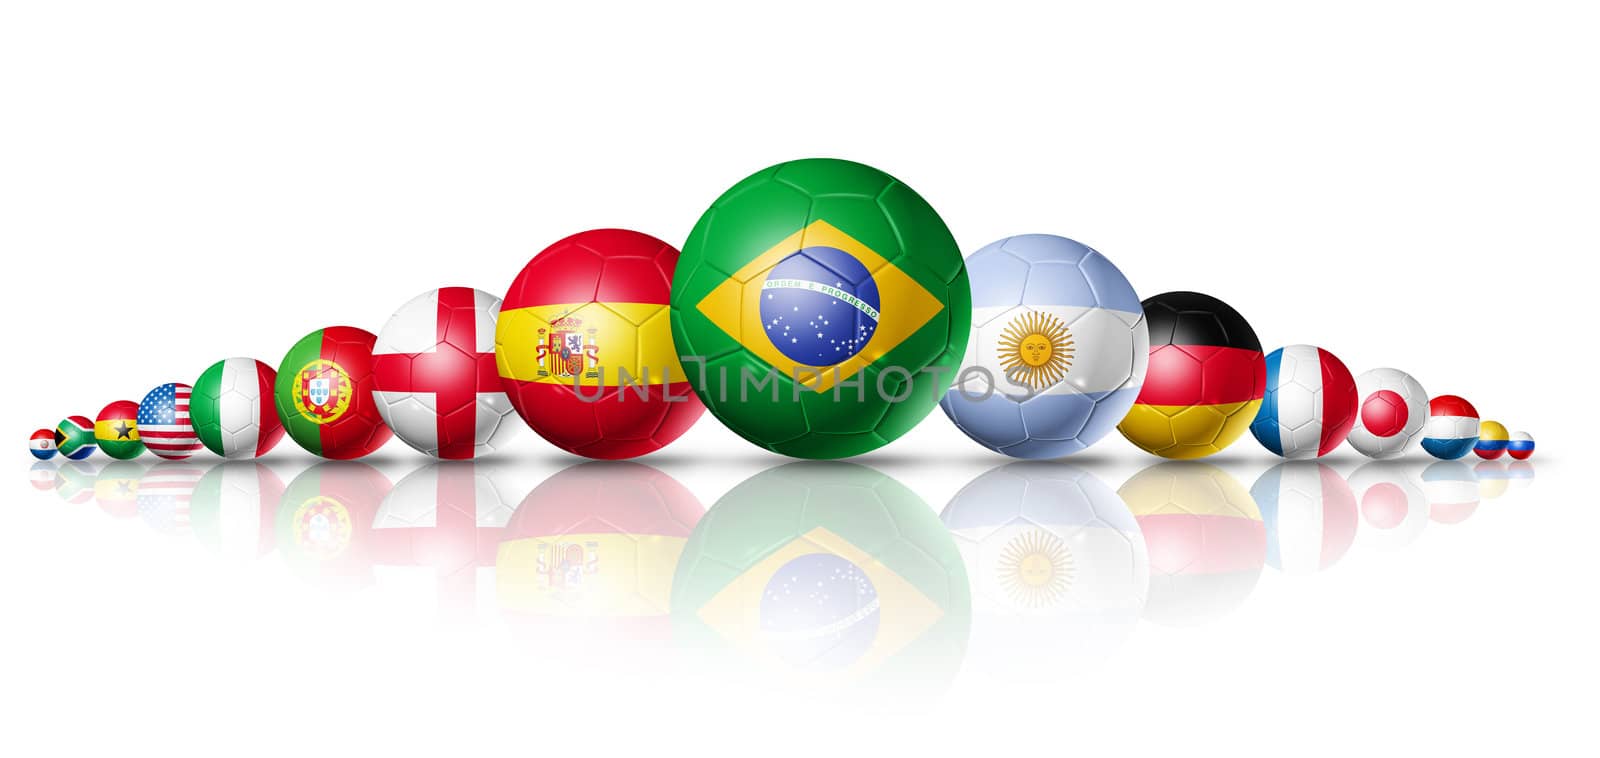 Soccer football balls group with teams flags by daboost